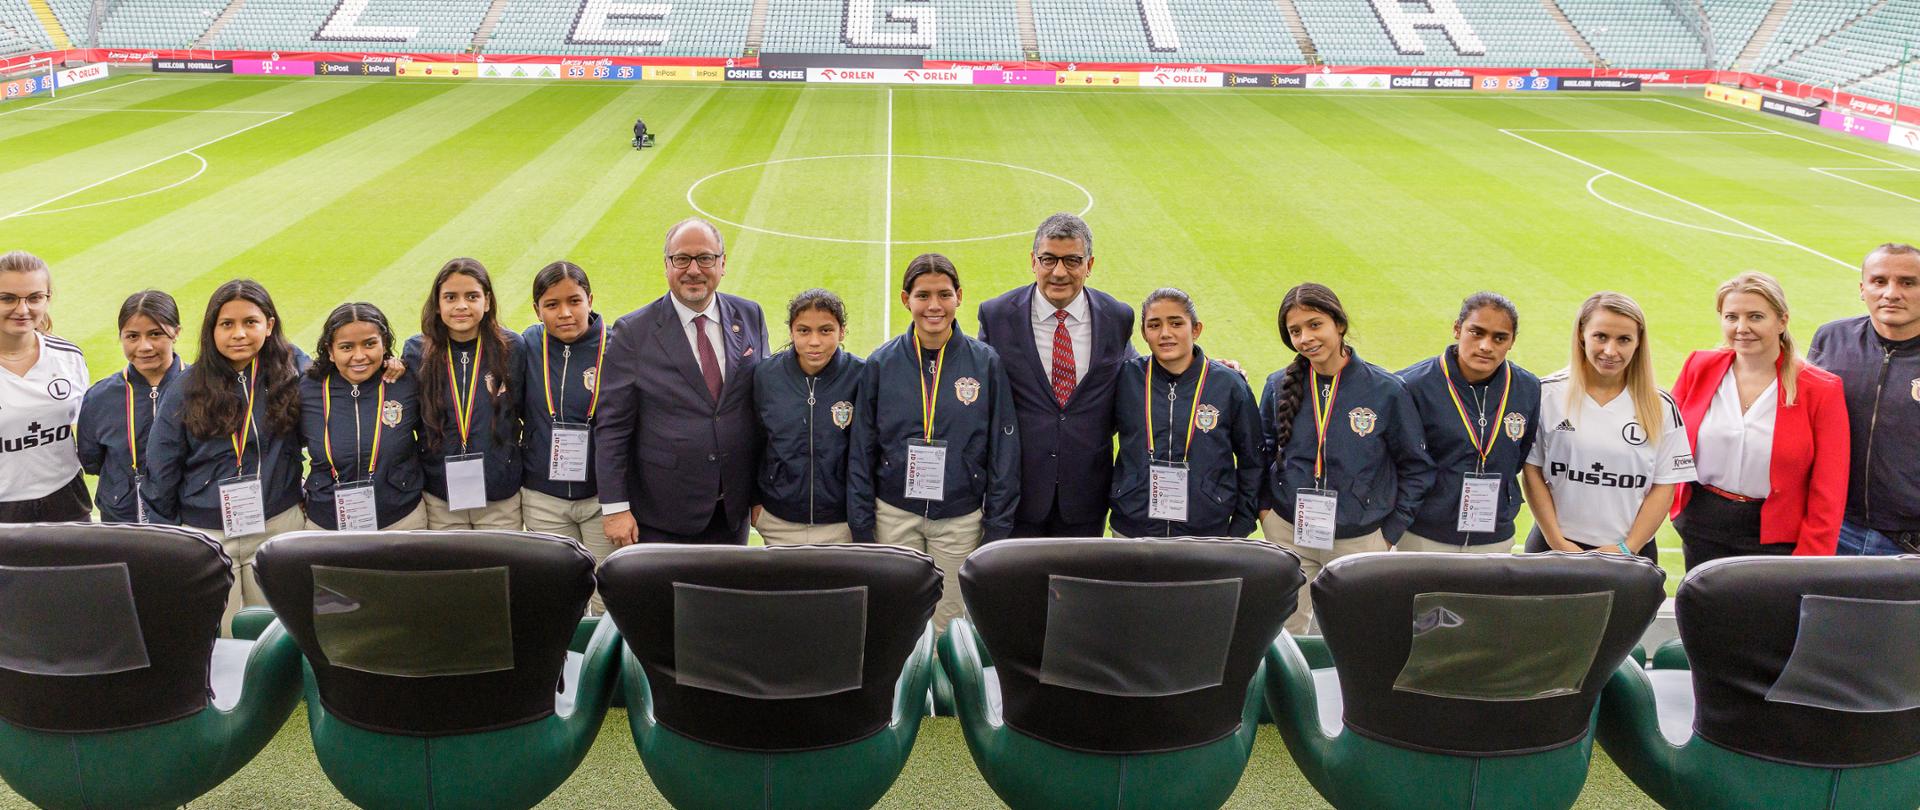 Head of The Foreign Service, Minister Arkady Rzegocki met today young Colombians participating in the seventh edition of the sports diplomacy programme at the Legia Warsaw Stadium